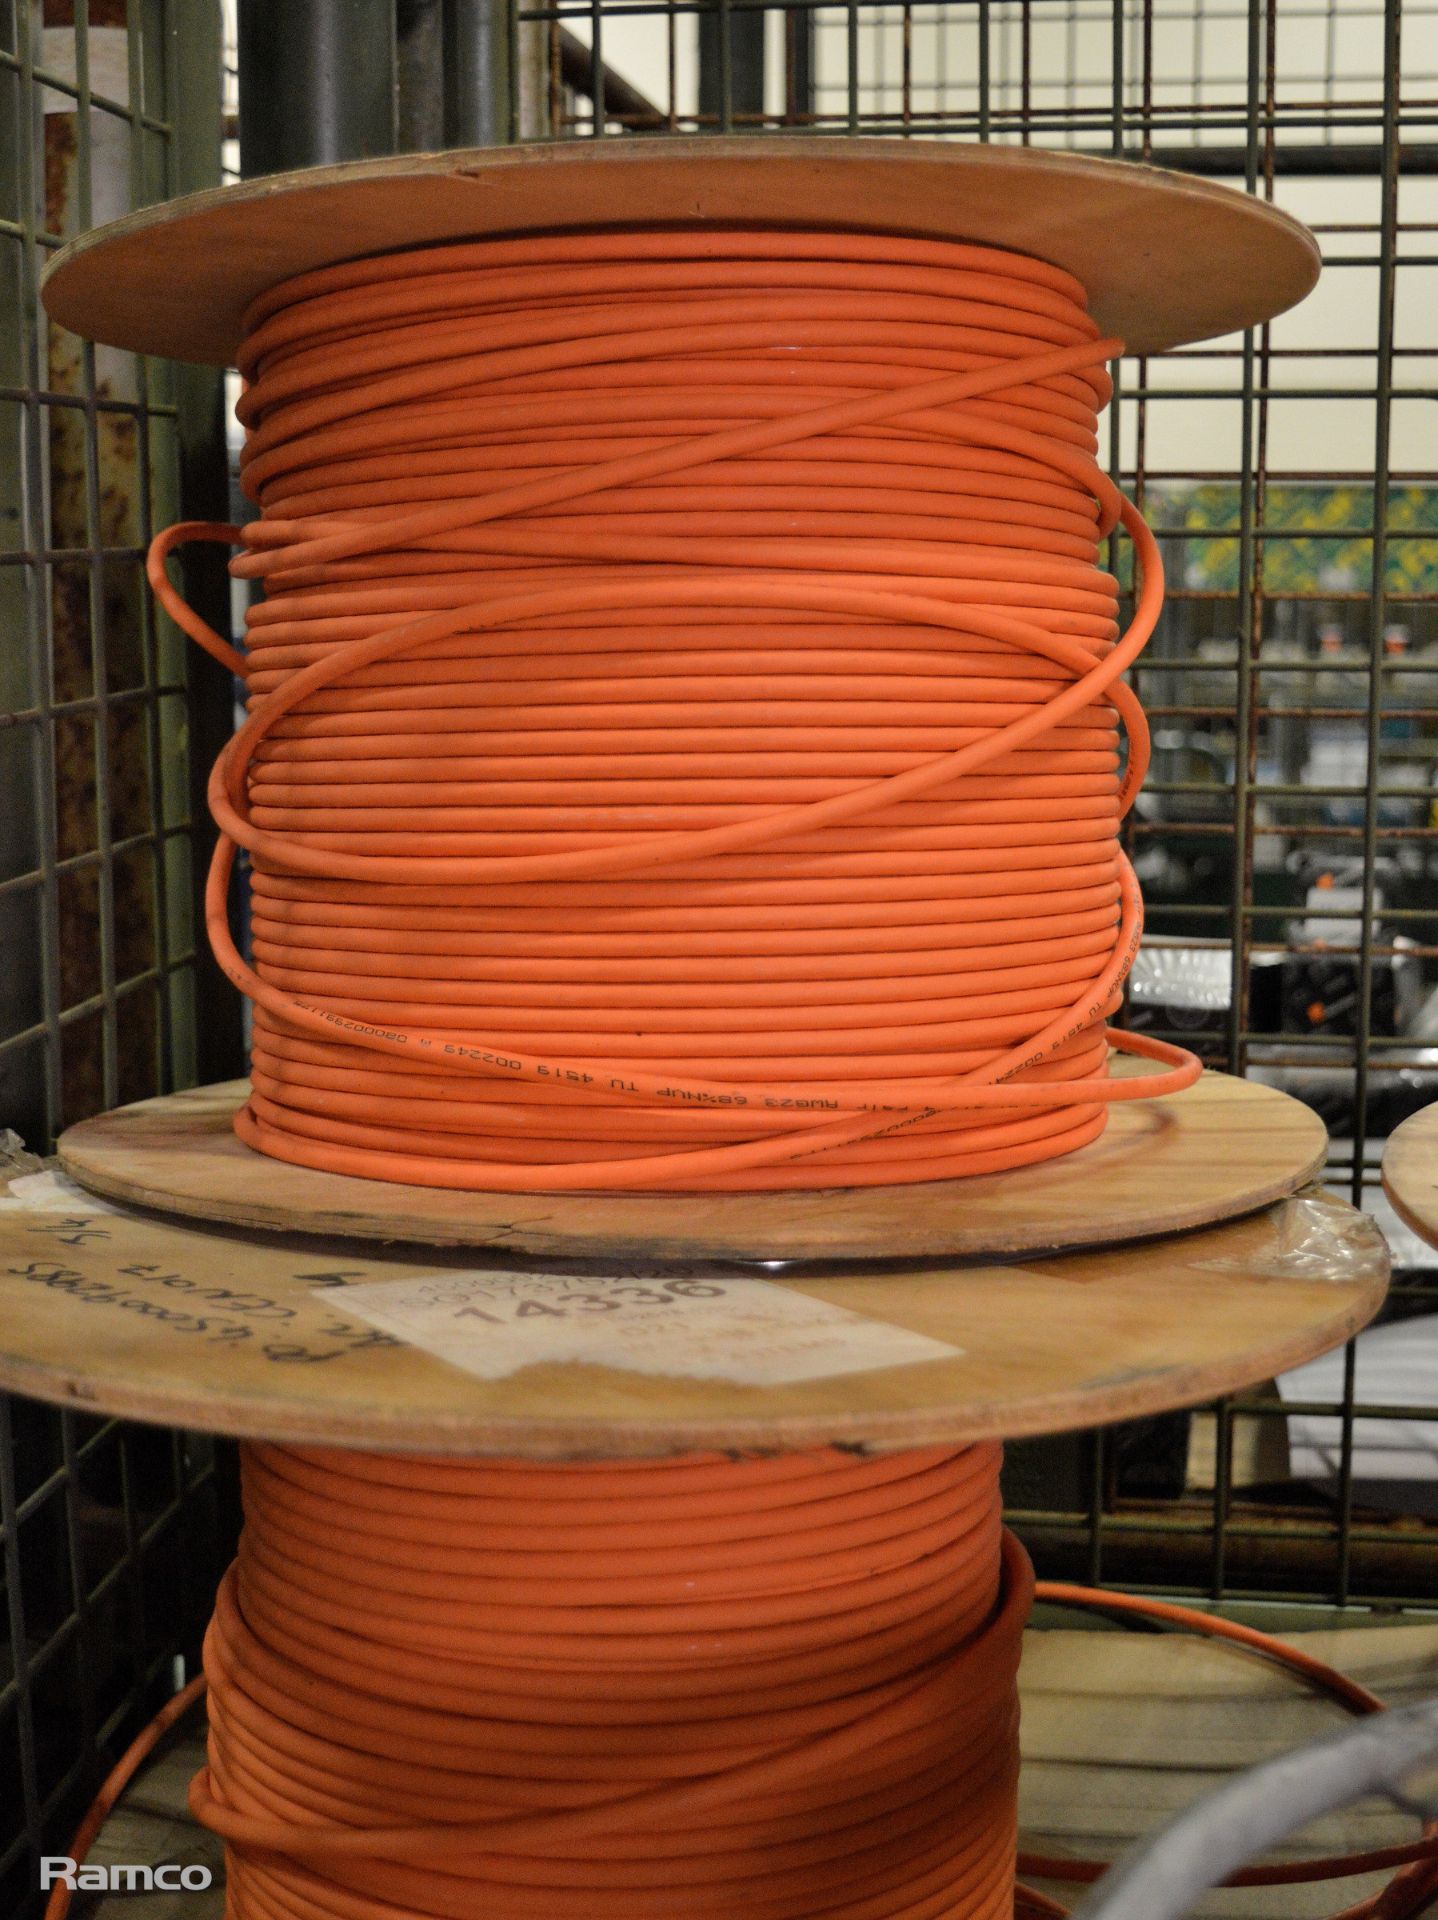 Various Cat 5 Cable - Unknown Lengths - 6 reels - Image 2 of 7